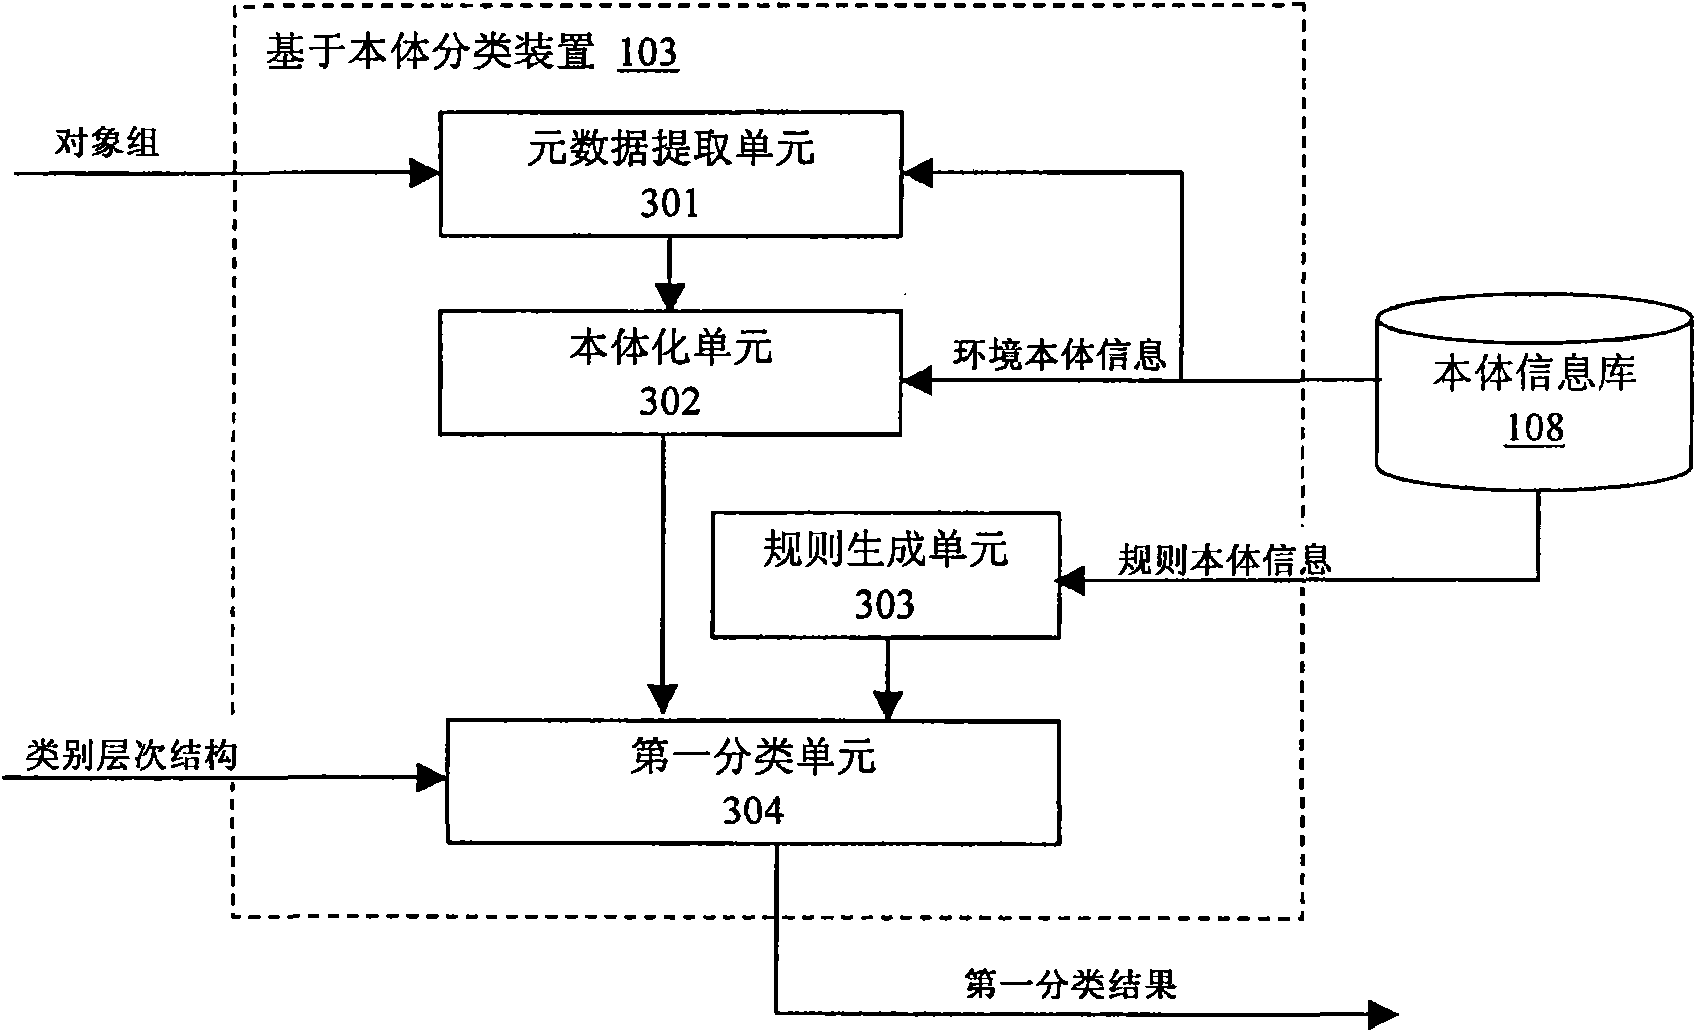 Method and system for automatically classifying objects